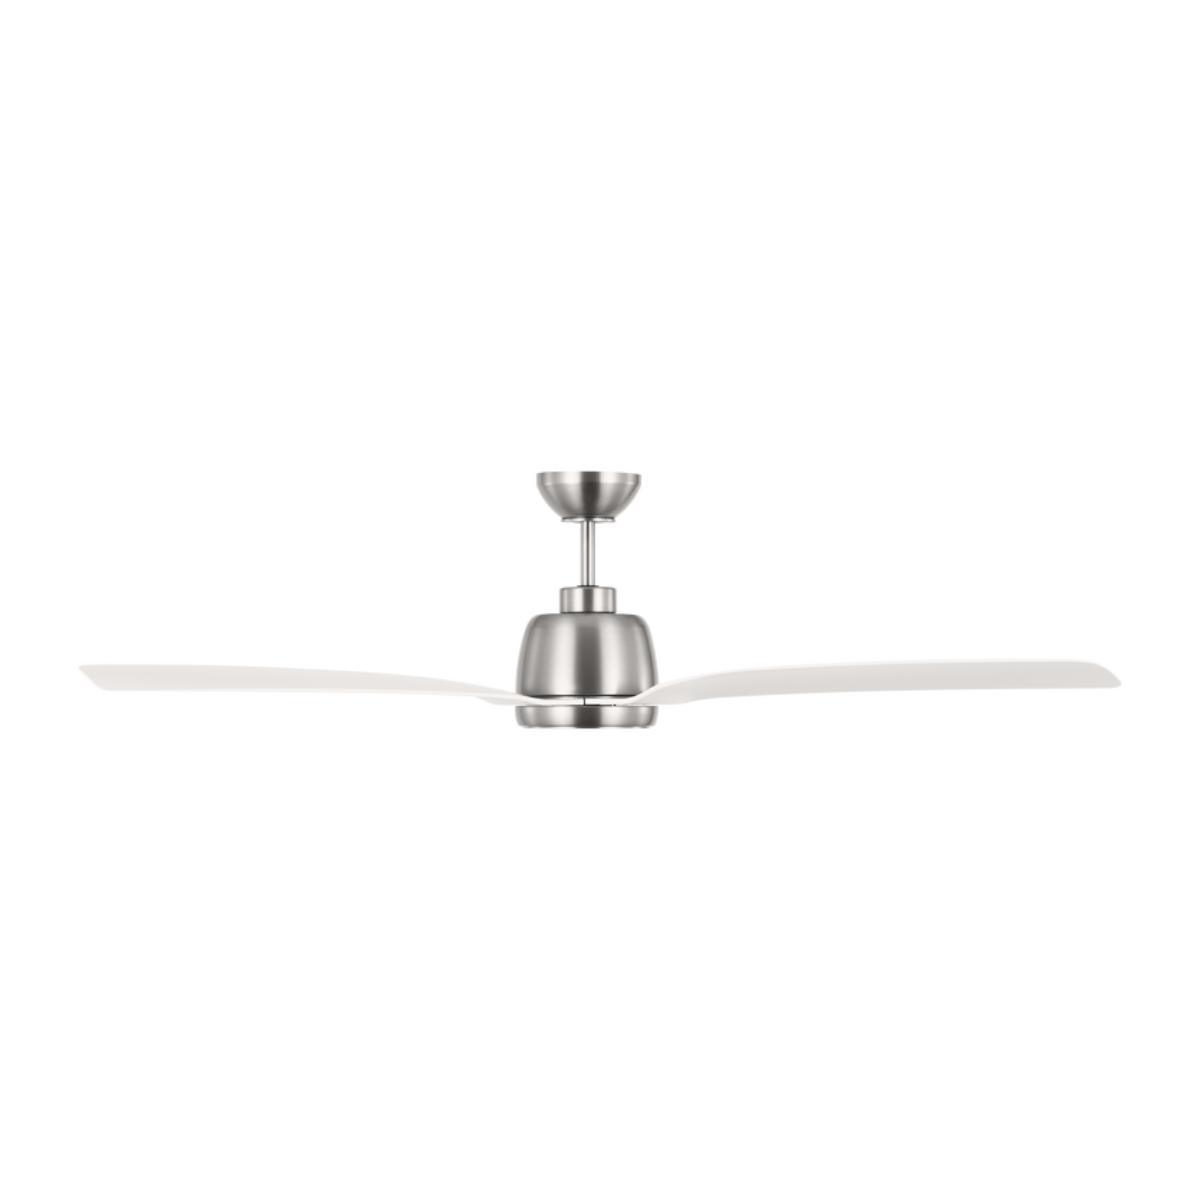 Avila 60 Inch LED Ceiling Fan with Light Kit and Remote, Brushed Steel with Silver Blades - Bees Lighting